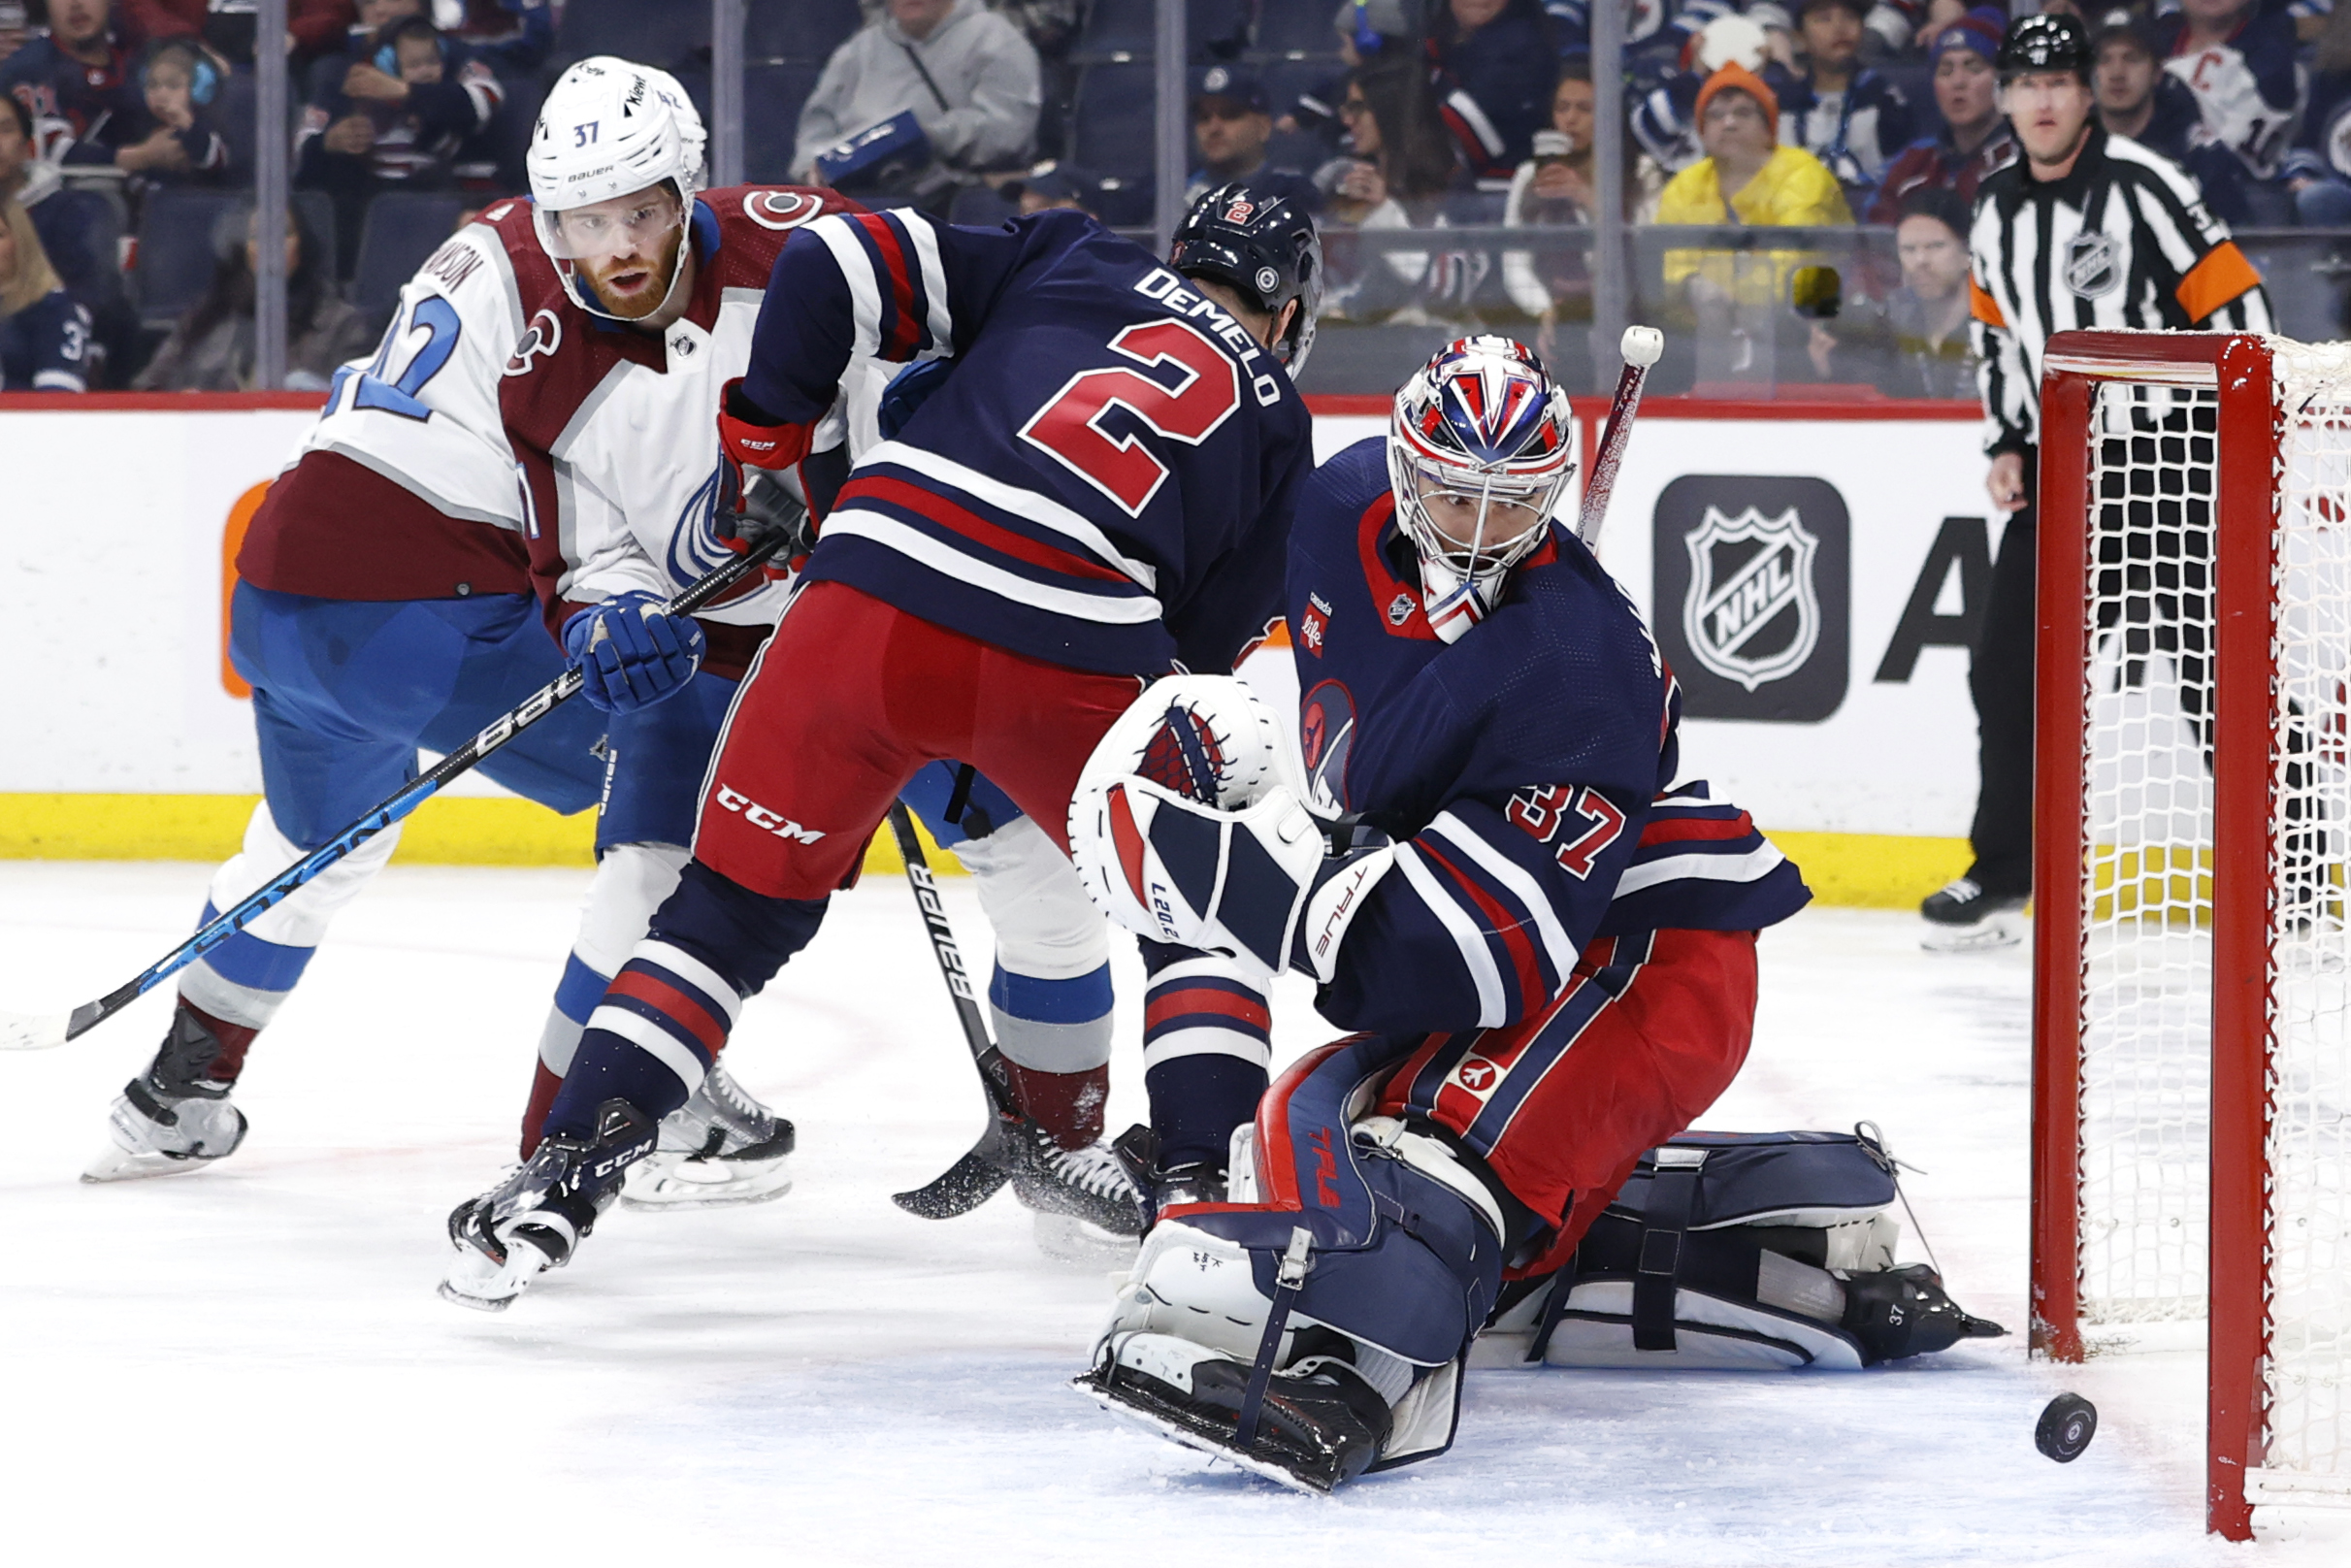 A Few Storylines in Game 2 for the Colorado Avalanche vs the Winnipeg Jets